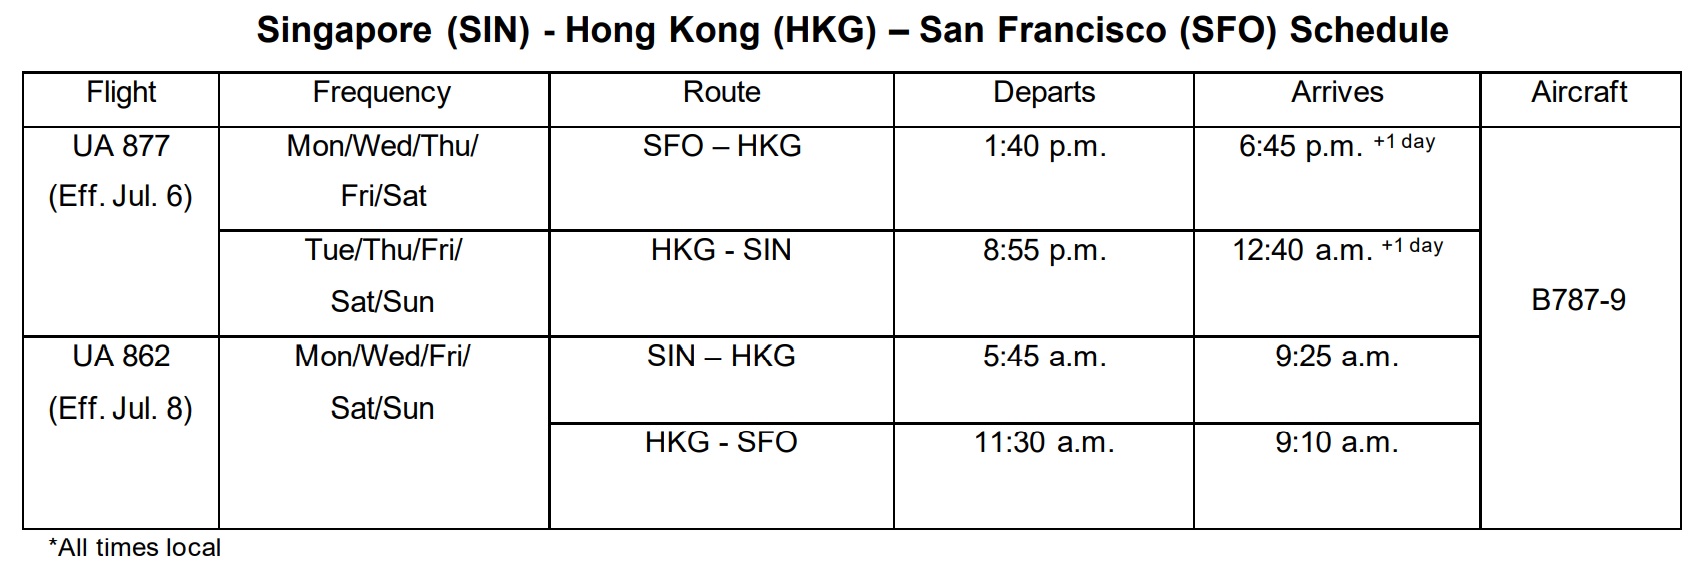 United Airlines will launch five flights per week between Singapore (SIN) and San Francisco (SFO) via Hong Kong (HKG) on Wednesday, 8 July. United’s SIN-HKG-SFO route will be operated by